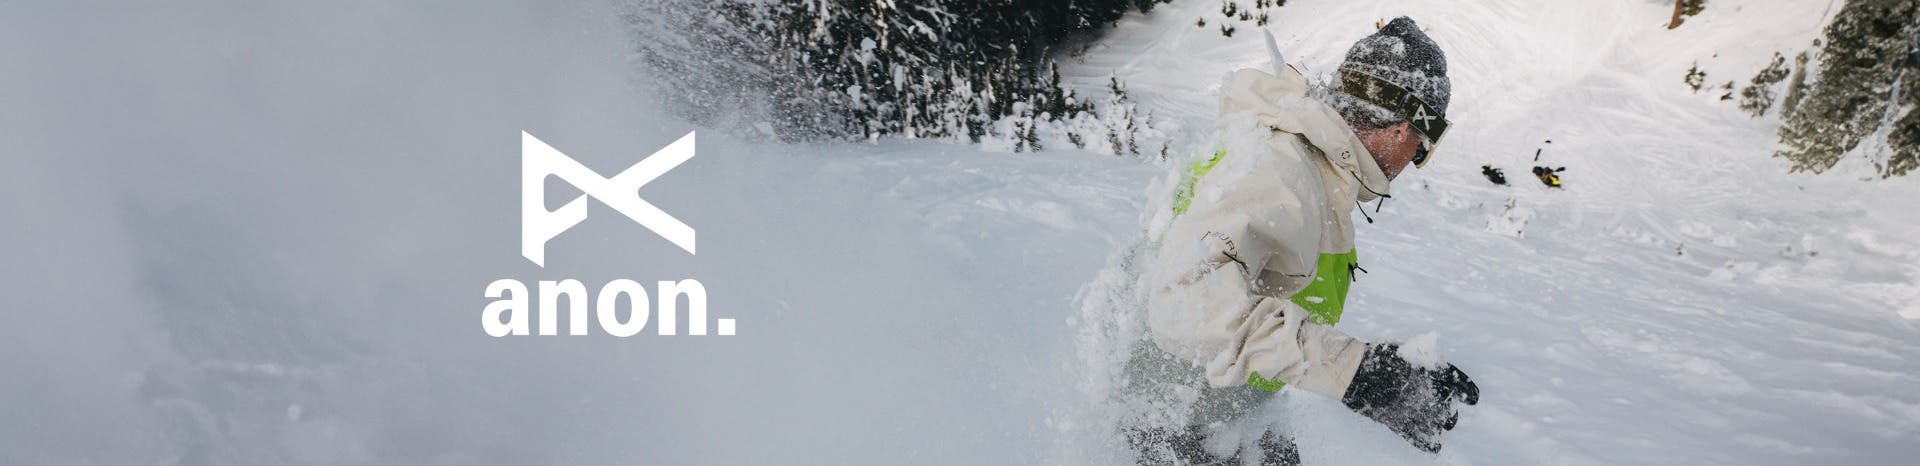 A white Anon logo and an image of a man wearing Anon goggles on his face while snowboarding down a mountain.